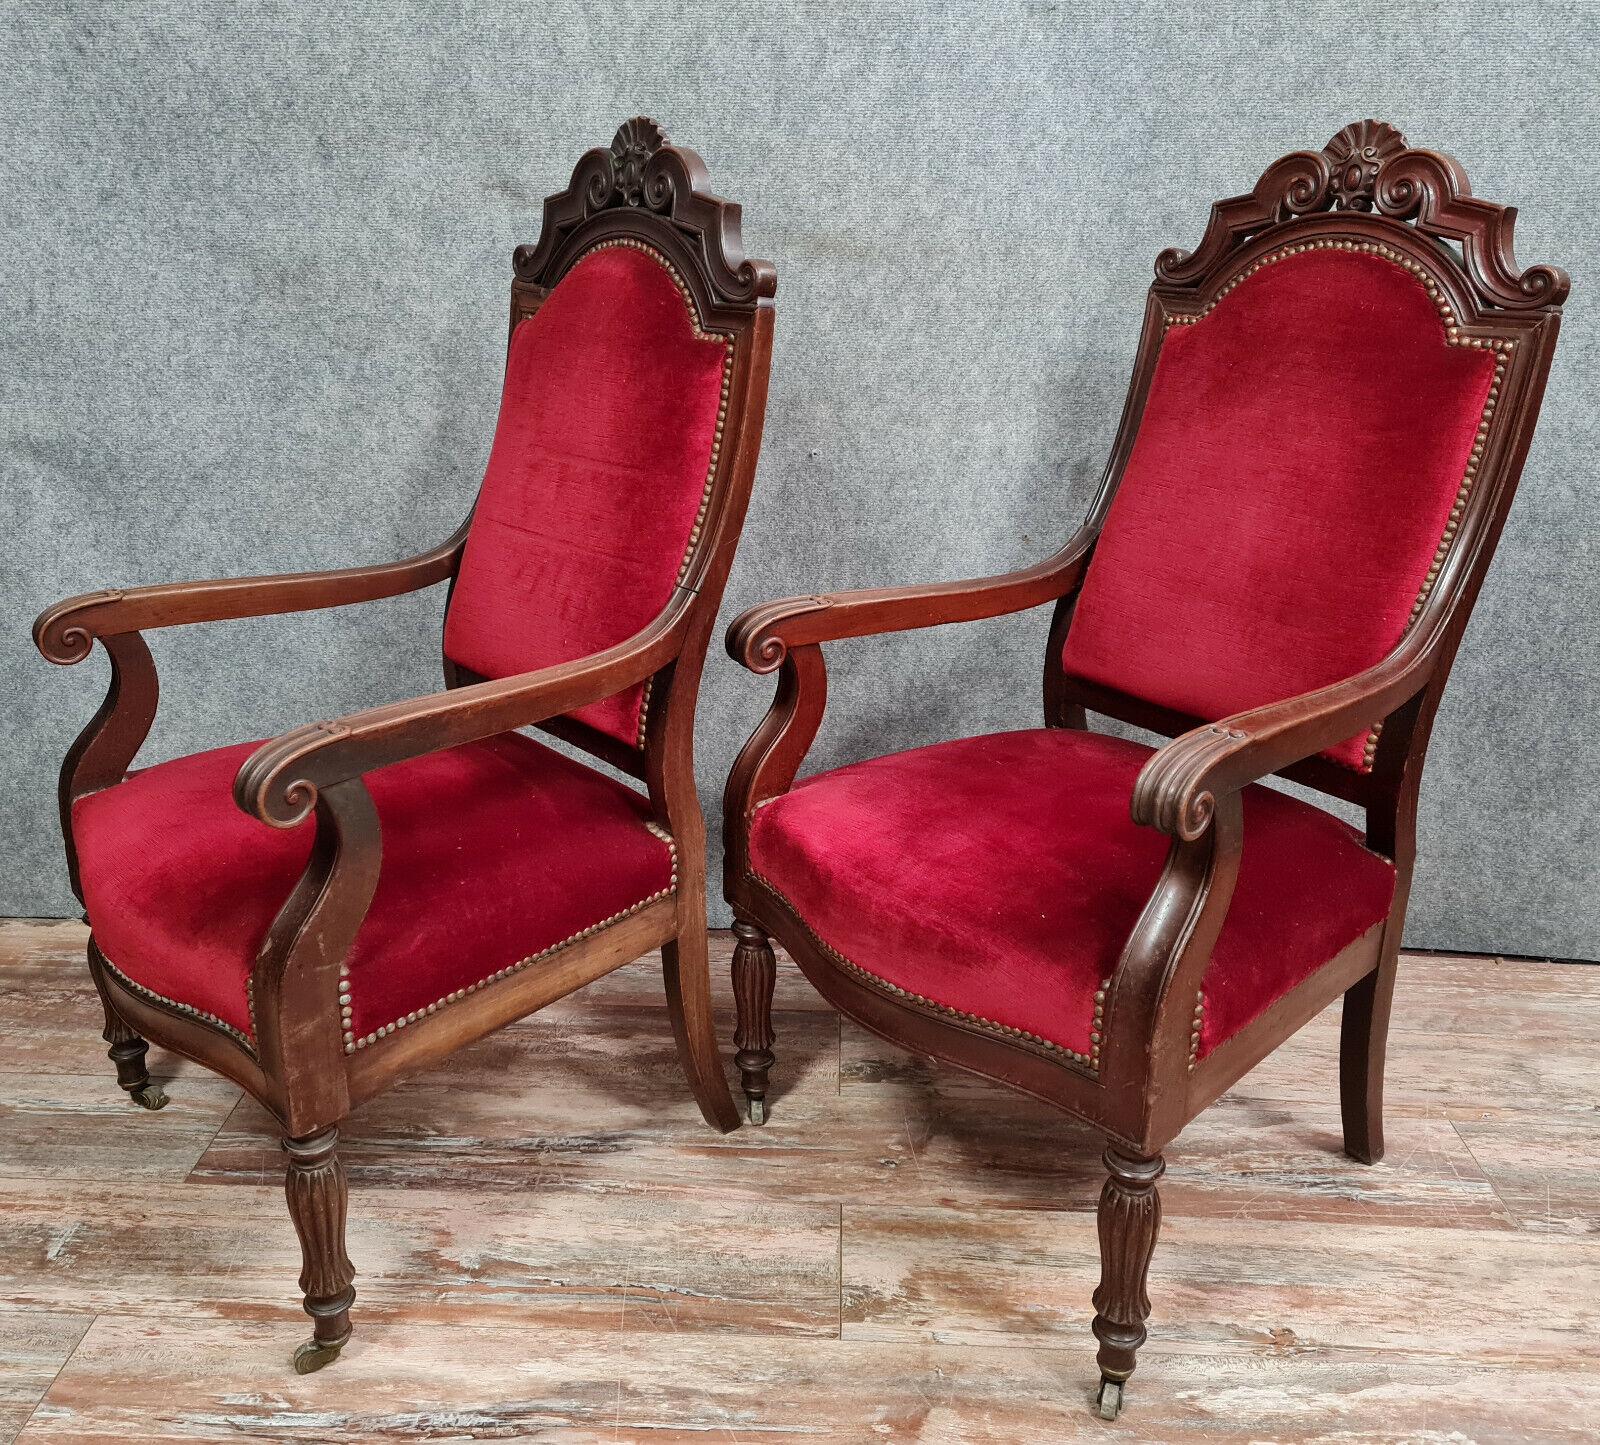 Exquisite Set of 4 Restauration Period Mahogany Chairs, circa 1820 -1X32 For Sale 2